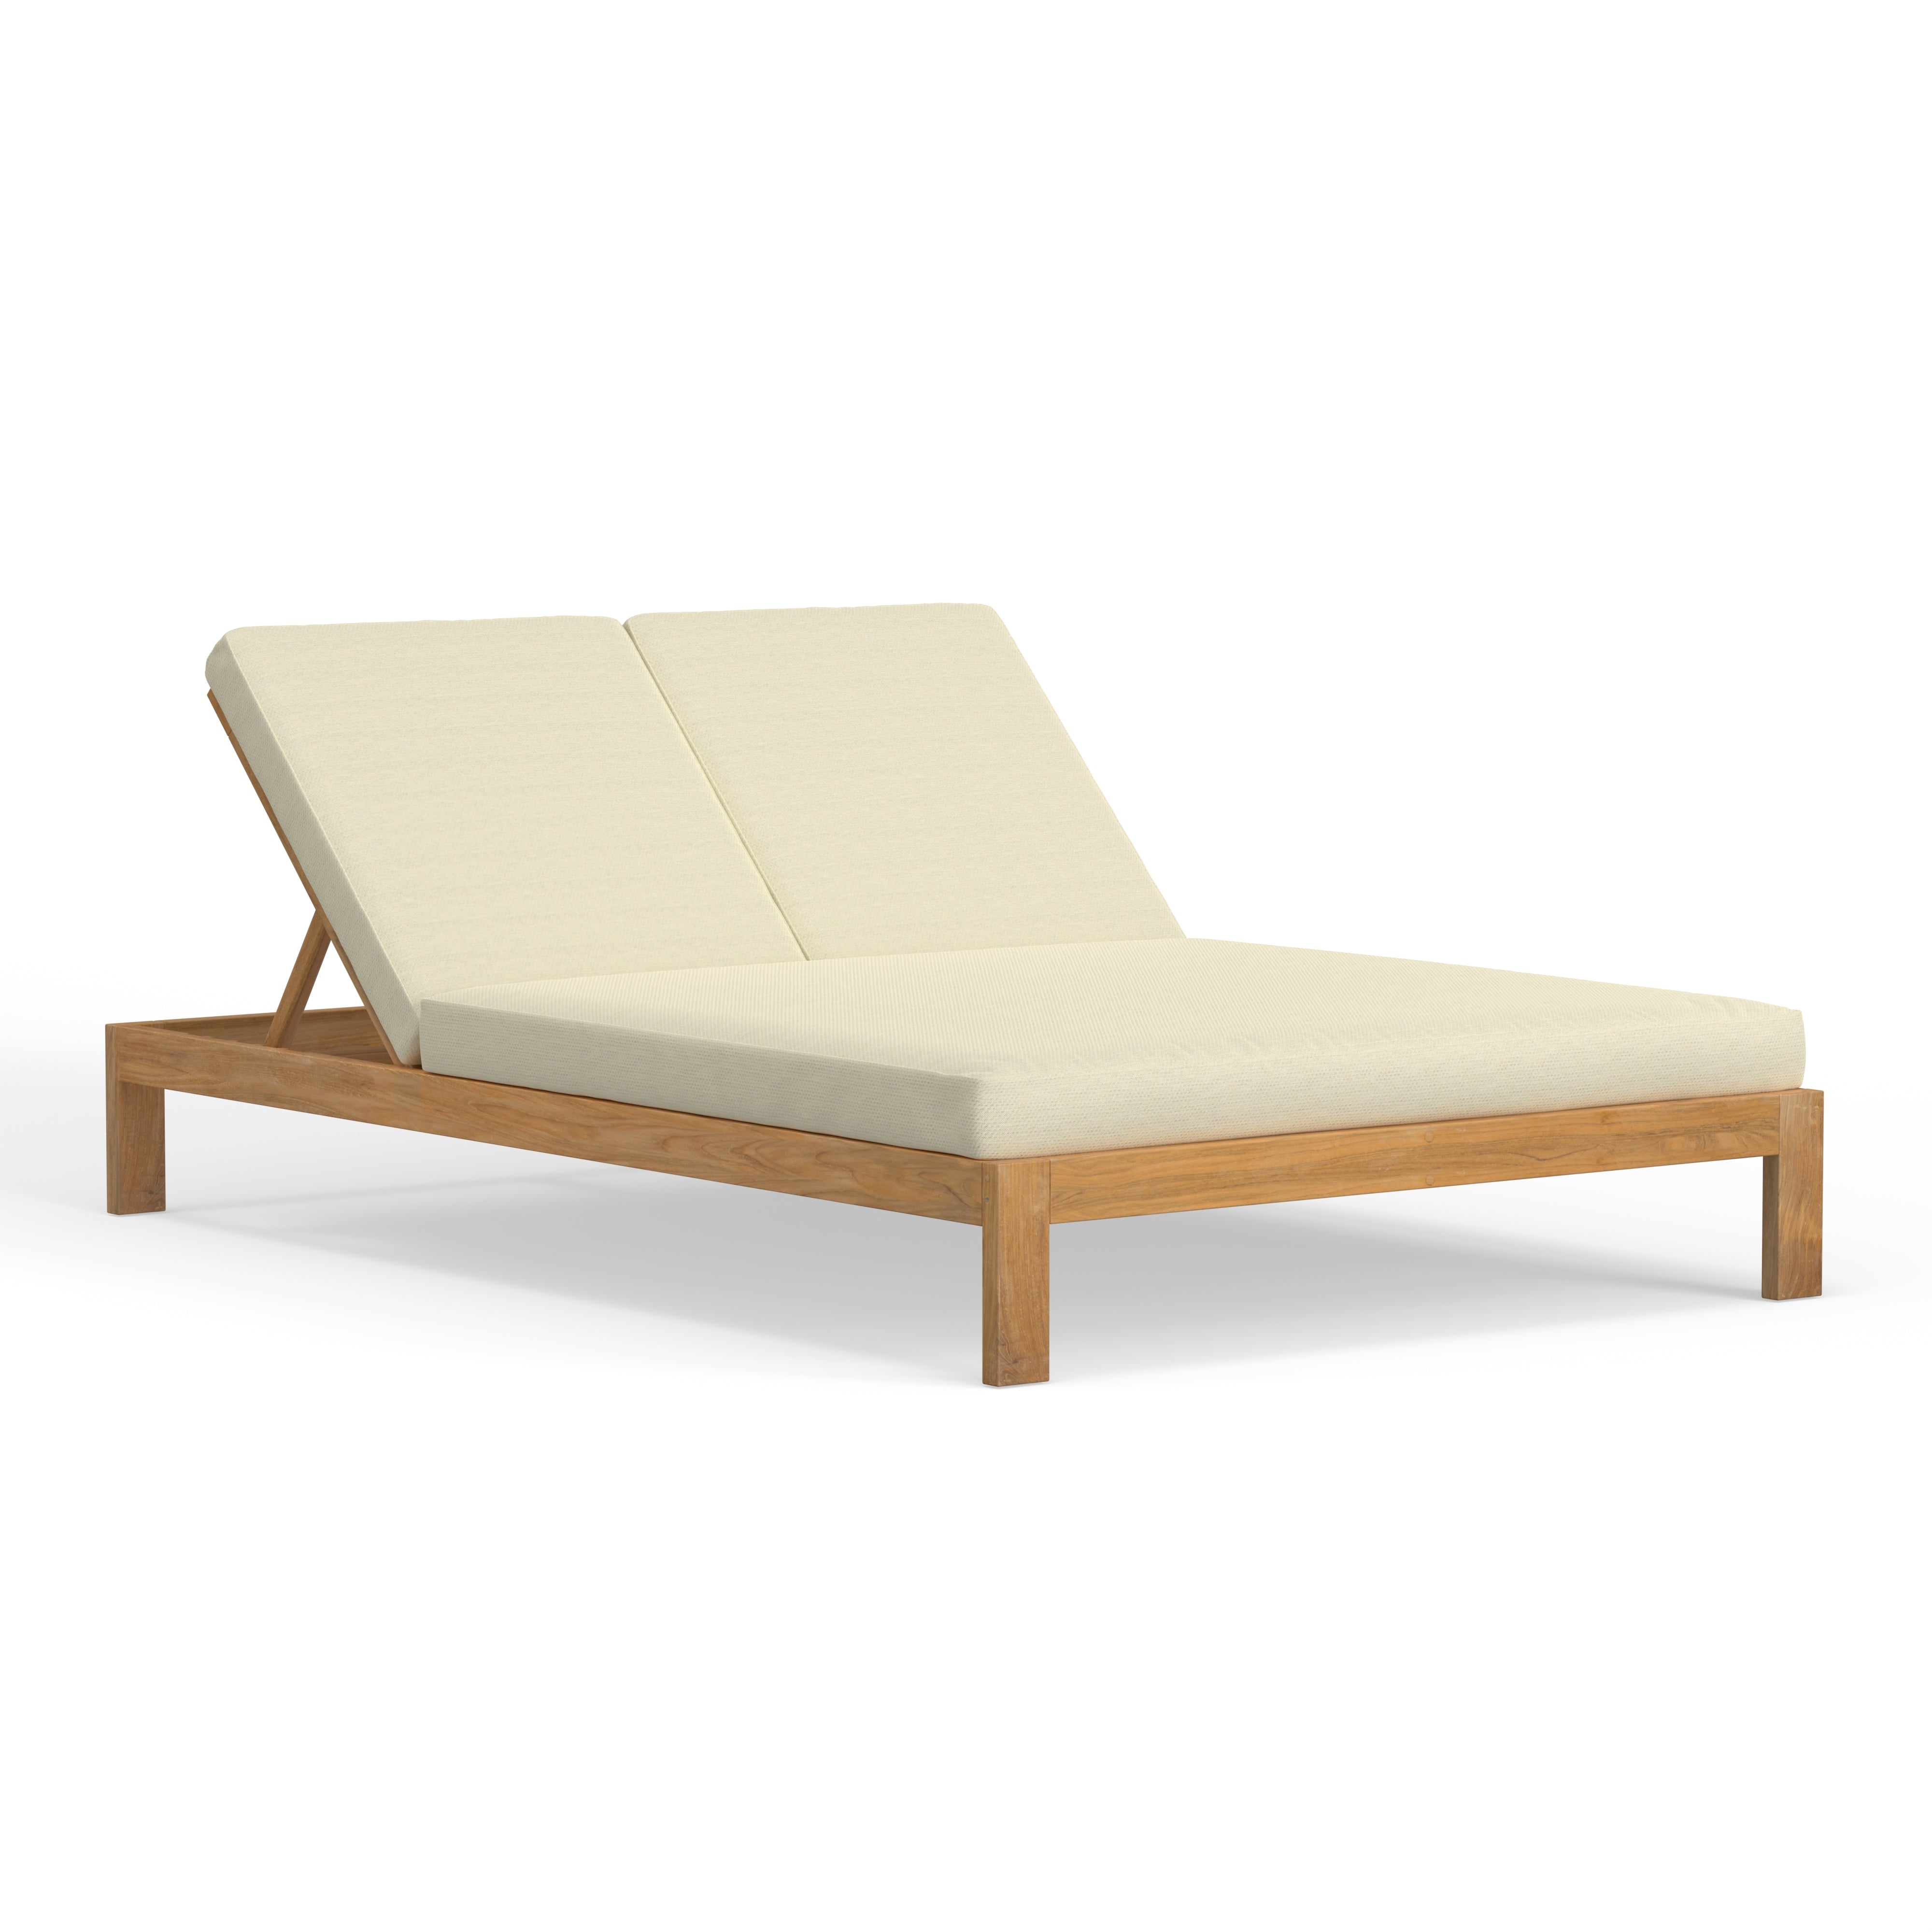  Handcrafted Outdoor Double Chaise Lounger